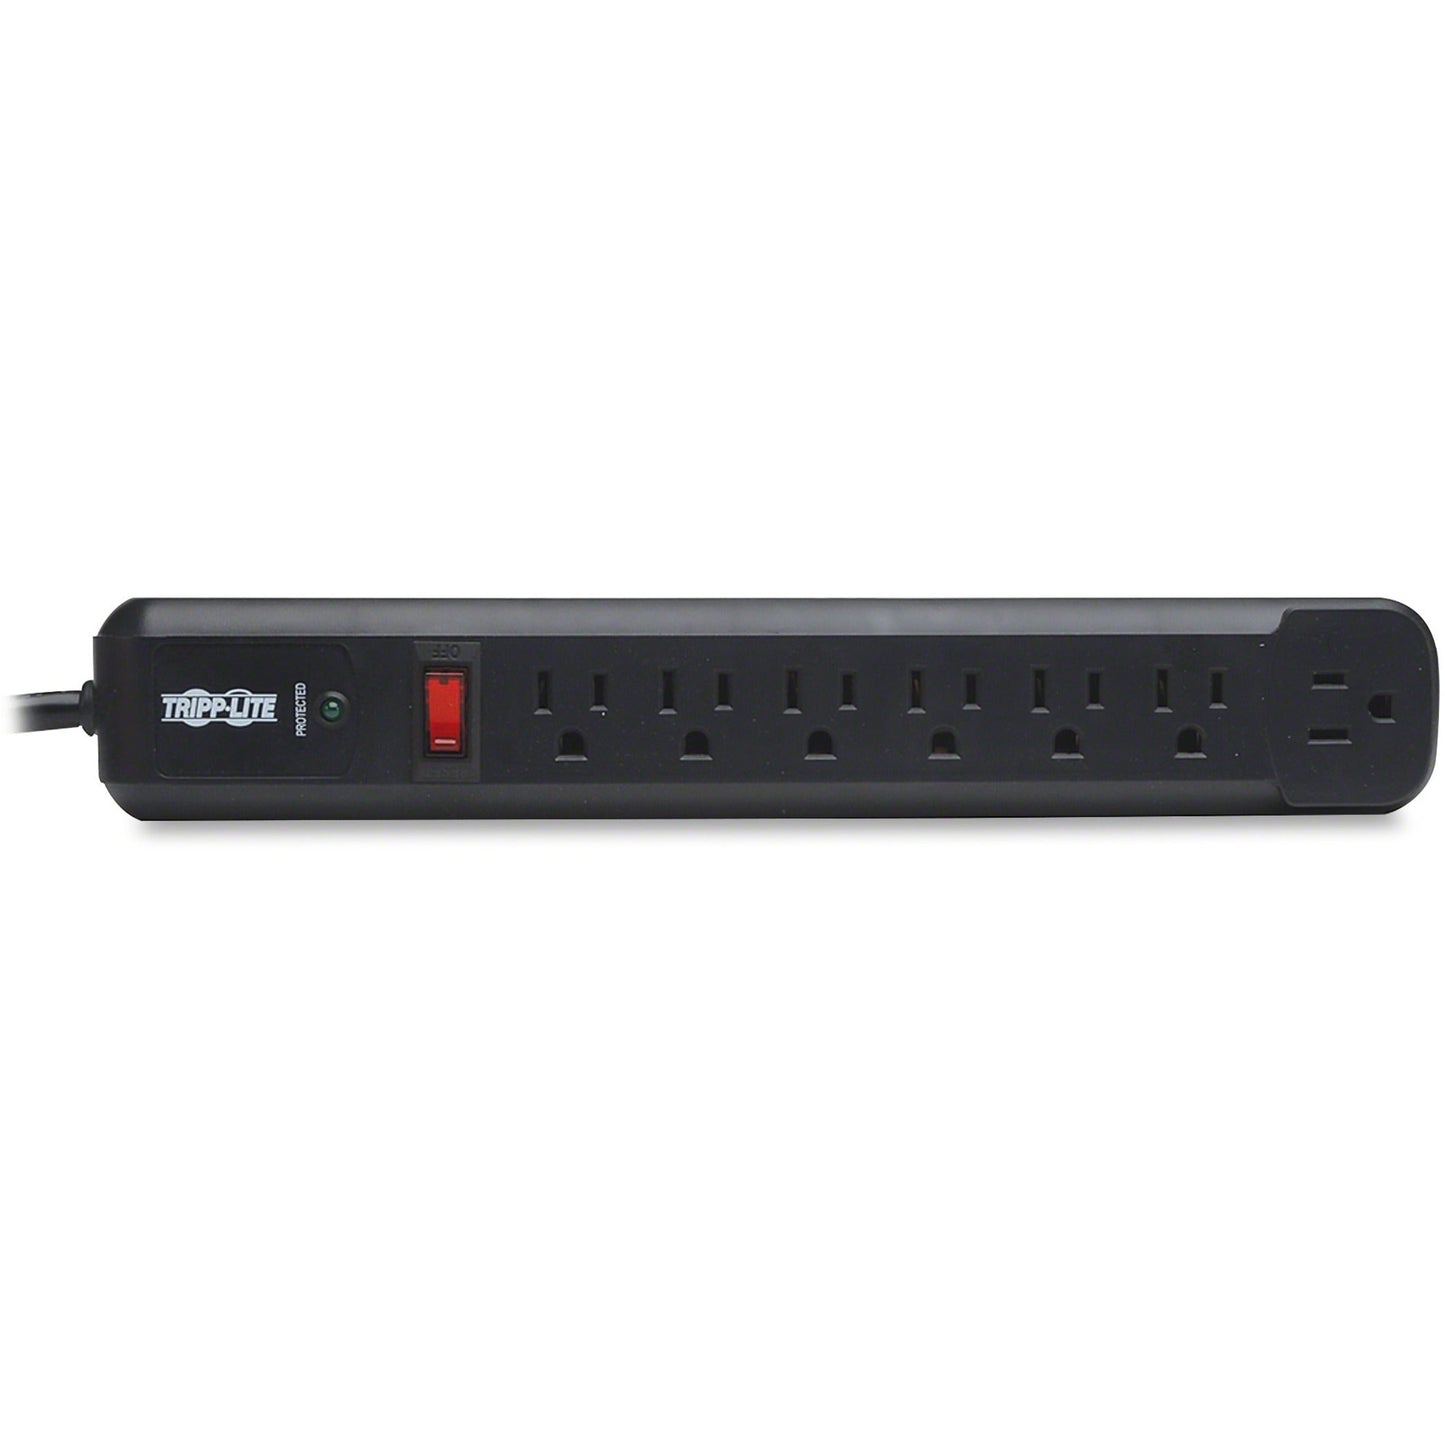 Tripp Lite Protect It! 7-Outlet Surge Protector 6 Right-Angle Outlets 4 ft. (1.22 m) Cord 1080 Joules Diagnostic LED Black Housing